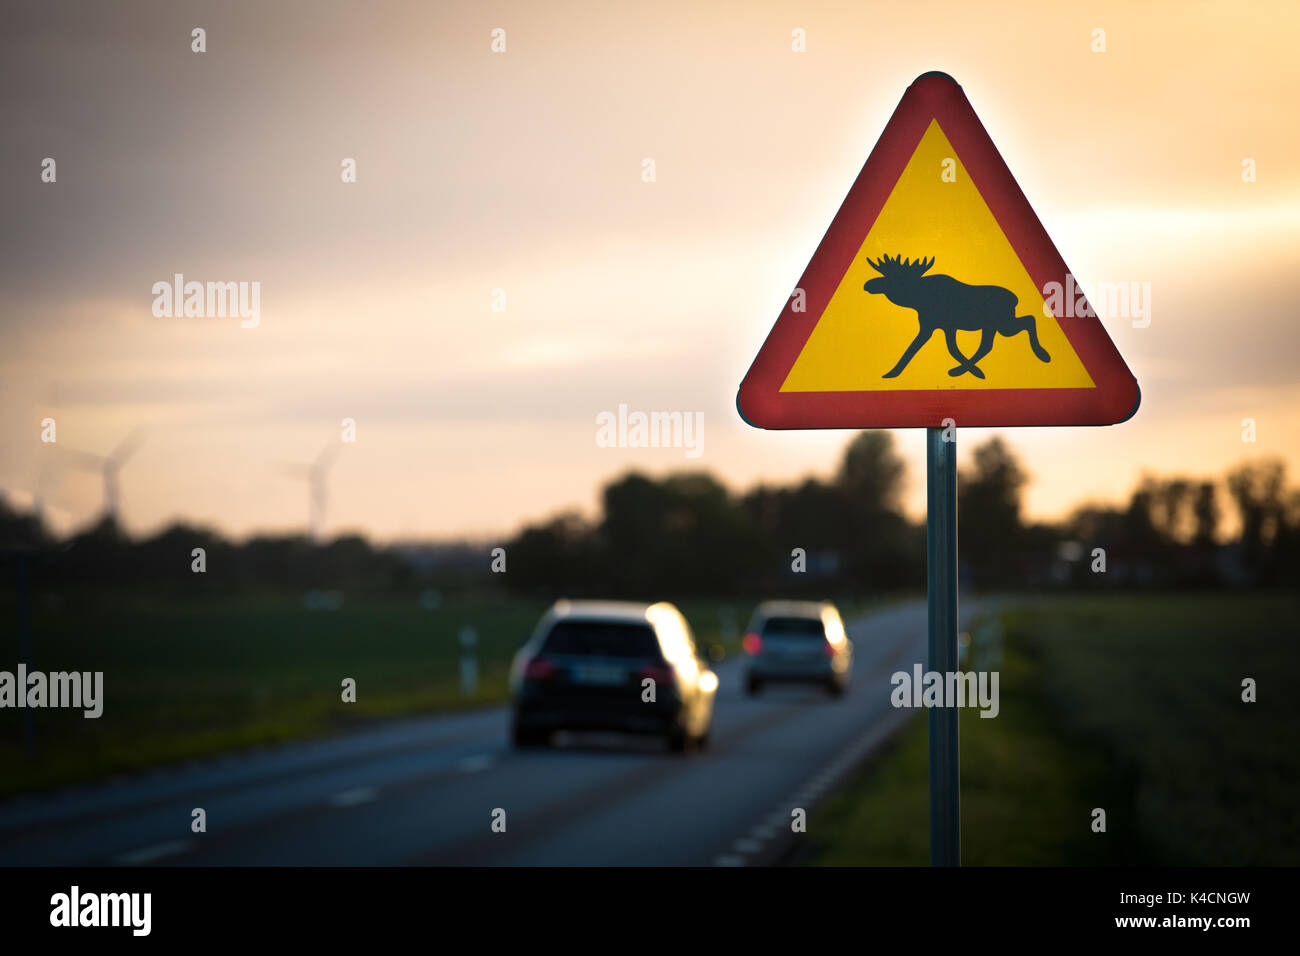 Warning Sign With Moose In Sweden Stock Photo